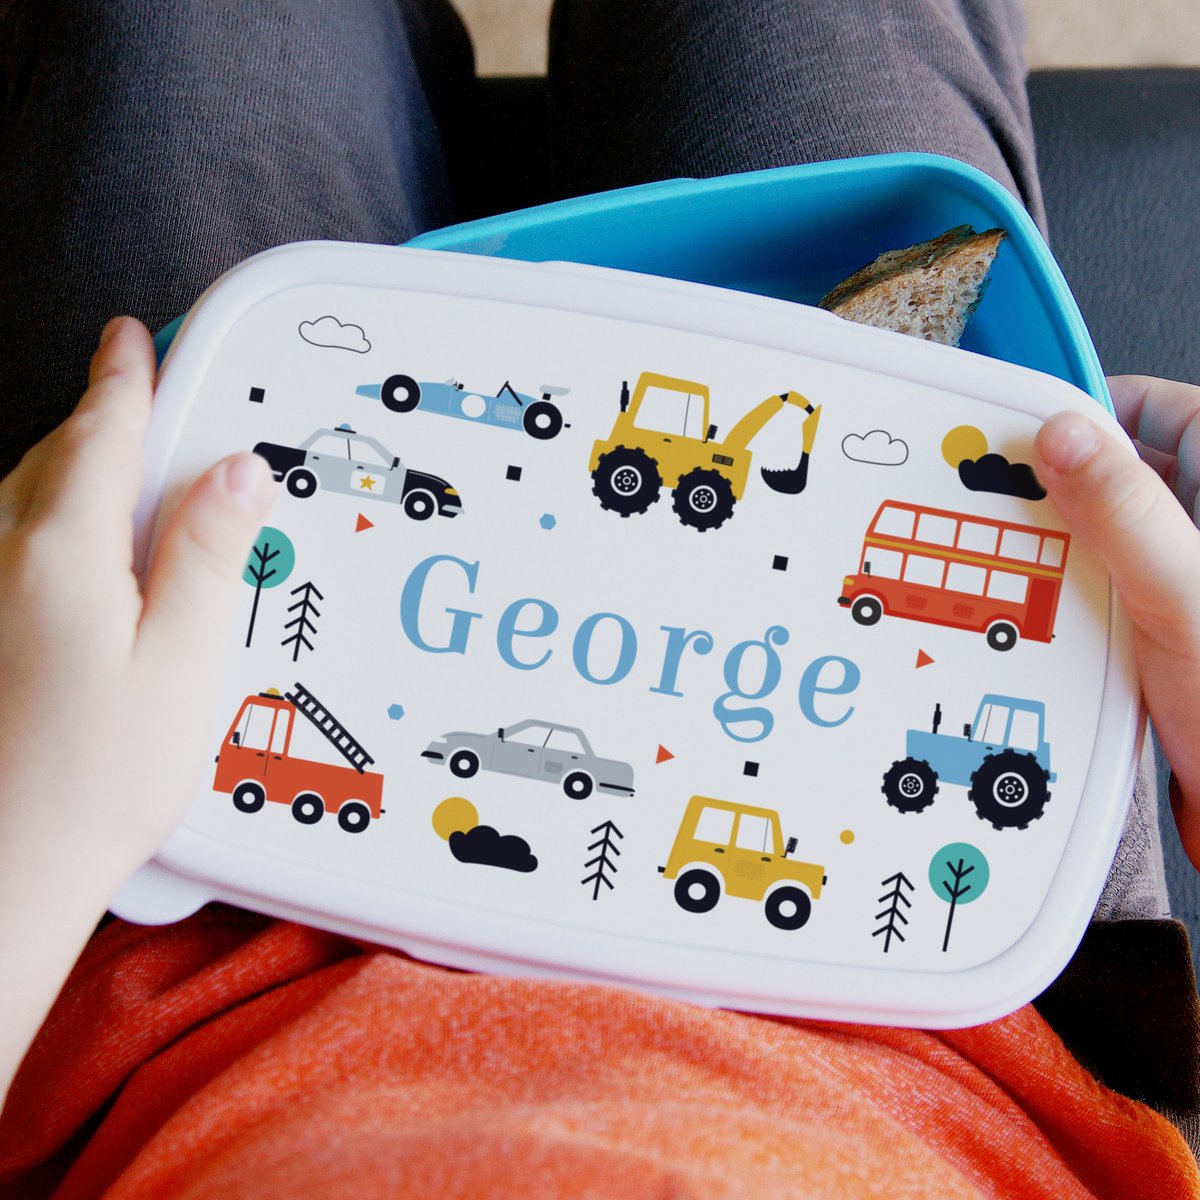 Perfect for sandwiches in the park or at nursery, this colourful lunch box is made from BPA free plastic & can be personalised with any name lilyblueuk.co.uk/personalised-t…
#lunchbox #personalised #packedlunch #EarlyBiz